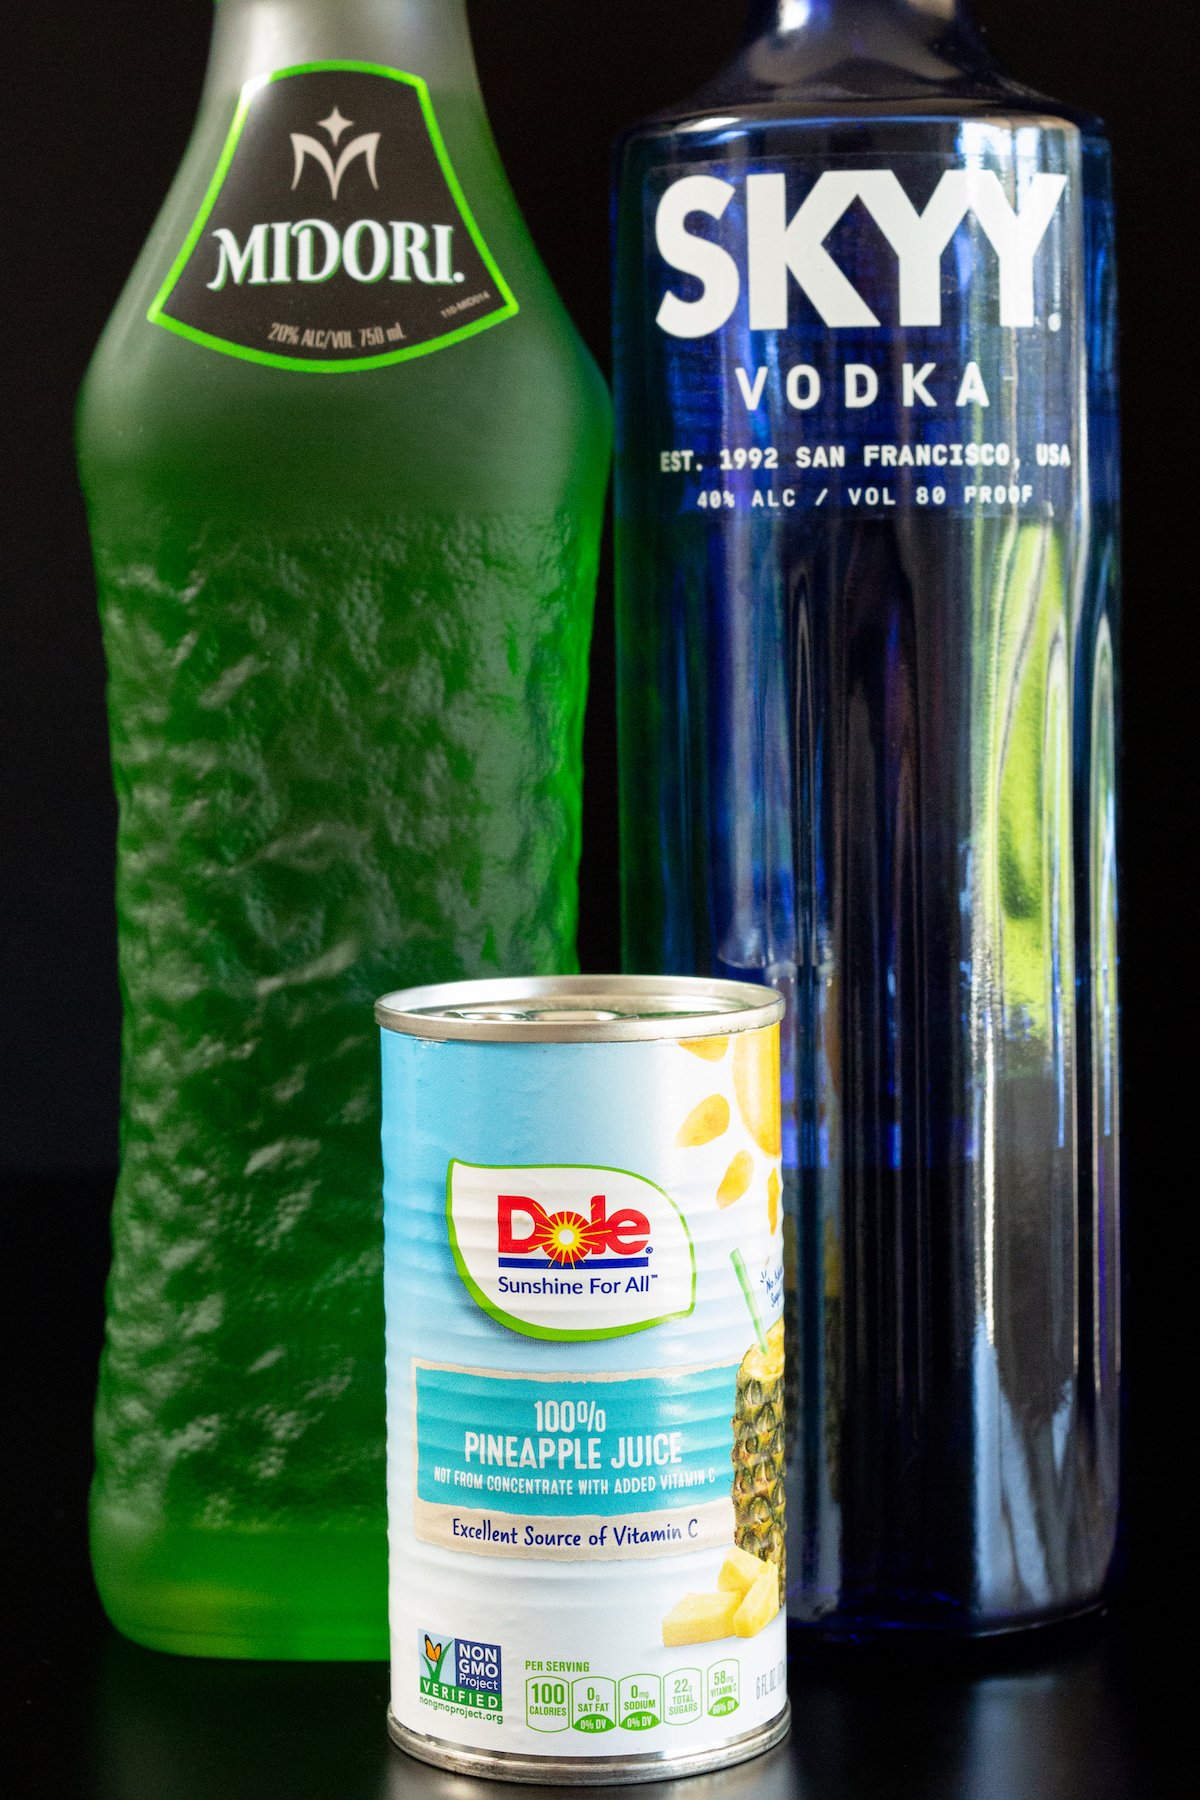 A bottle of Midori, Skyy Vodka, and a can of pineapple juice on a black background.